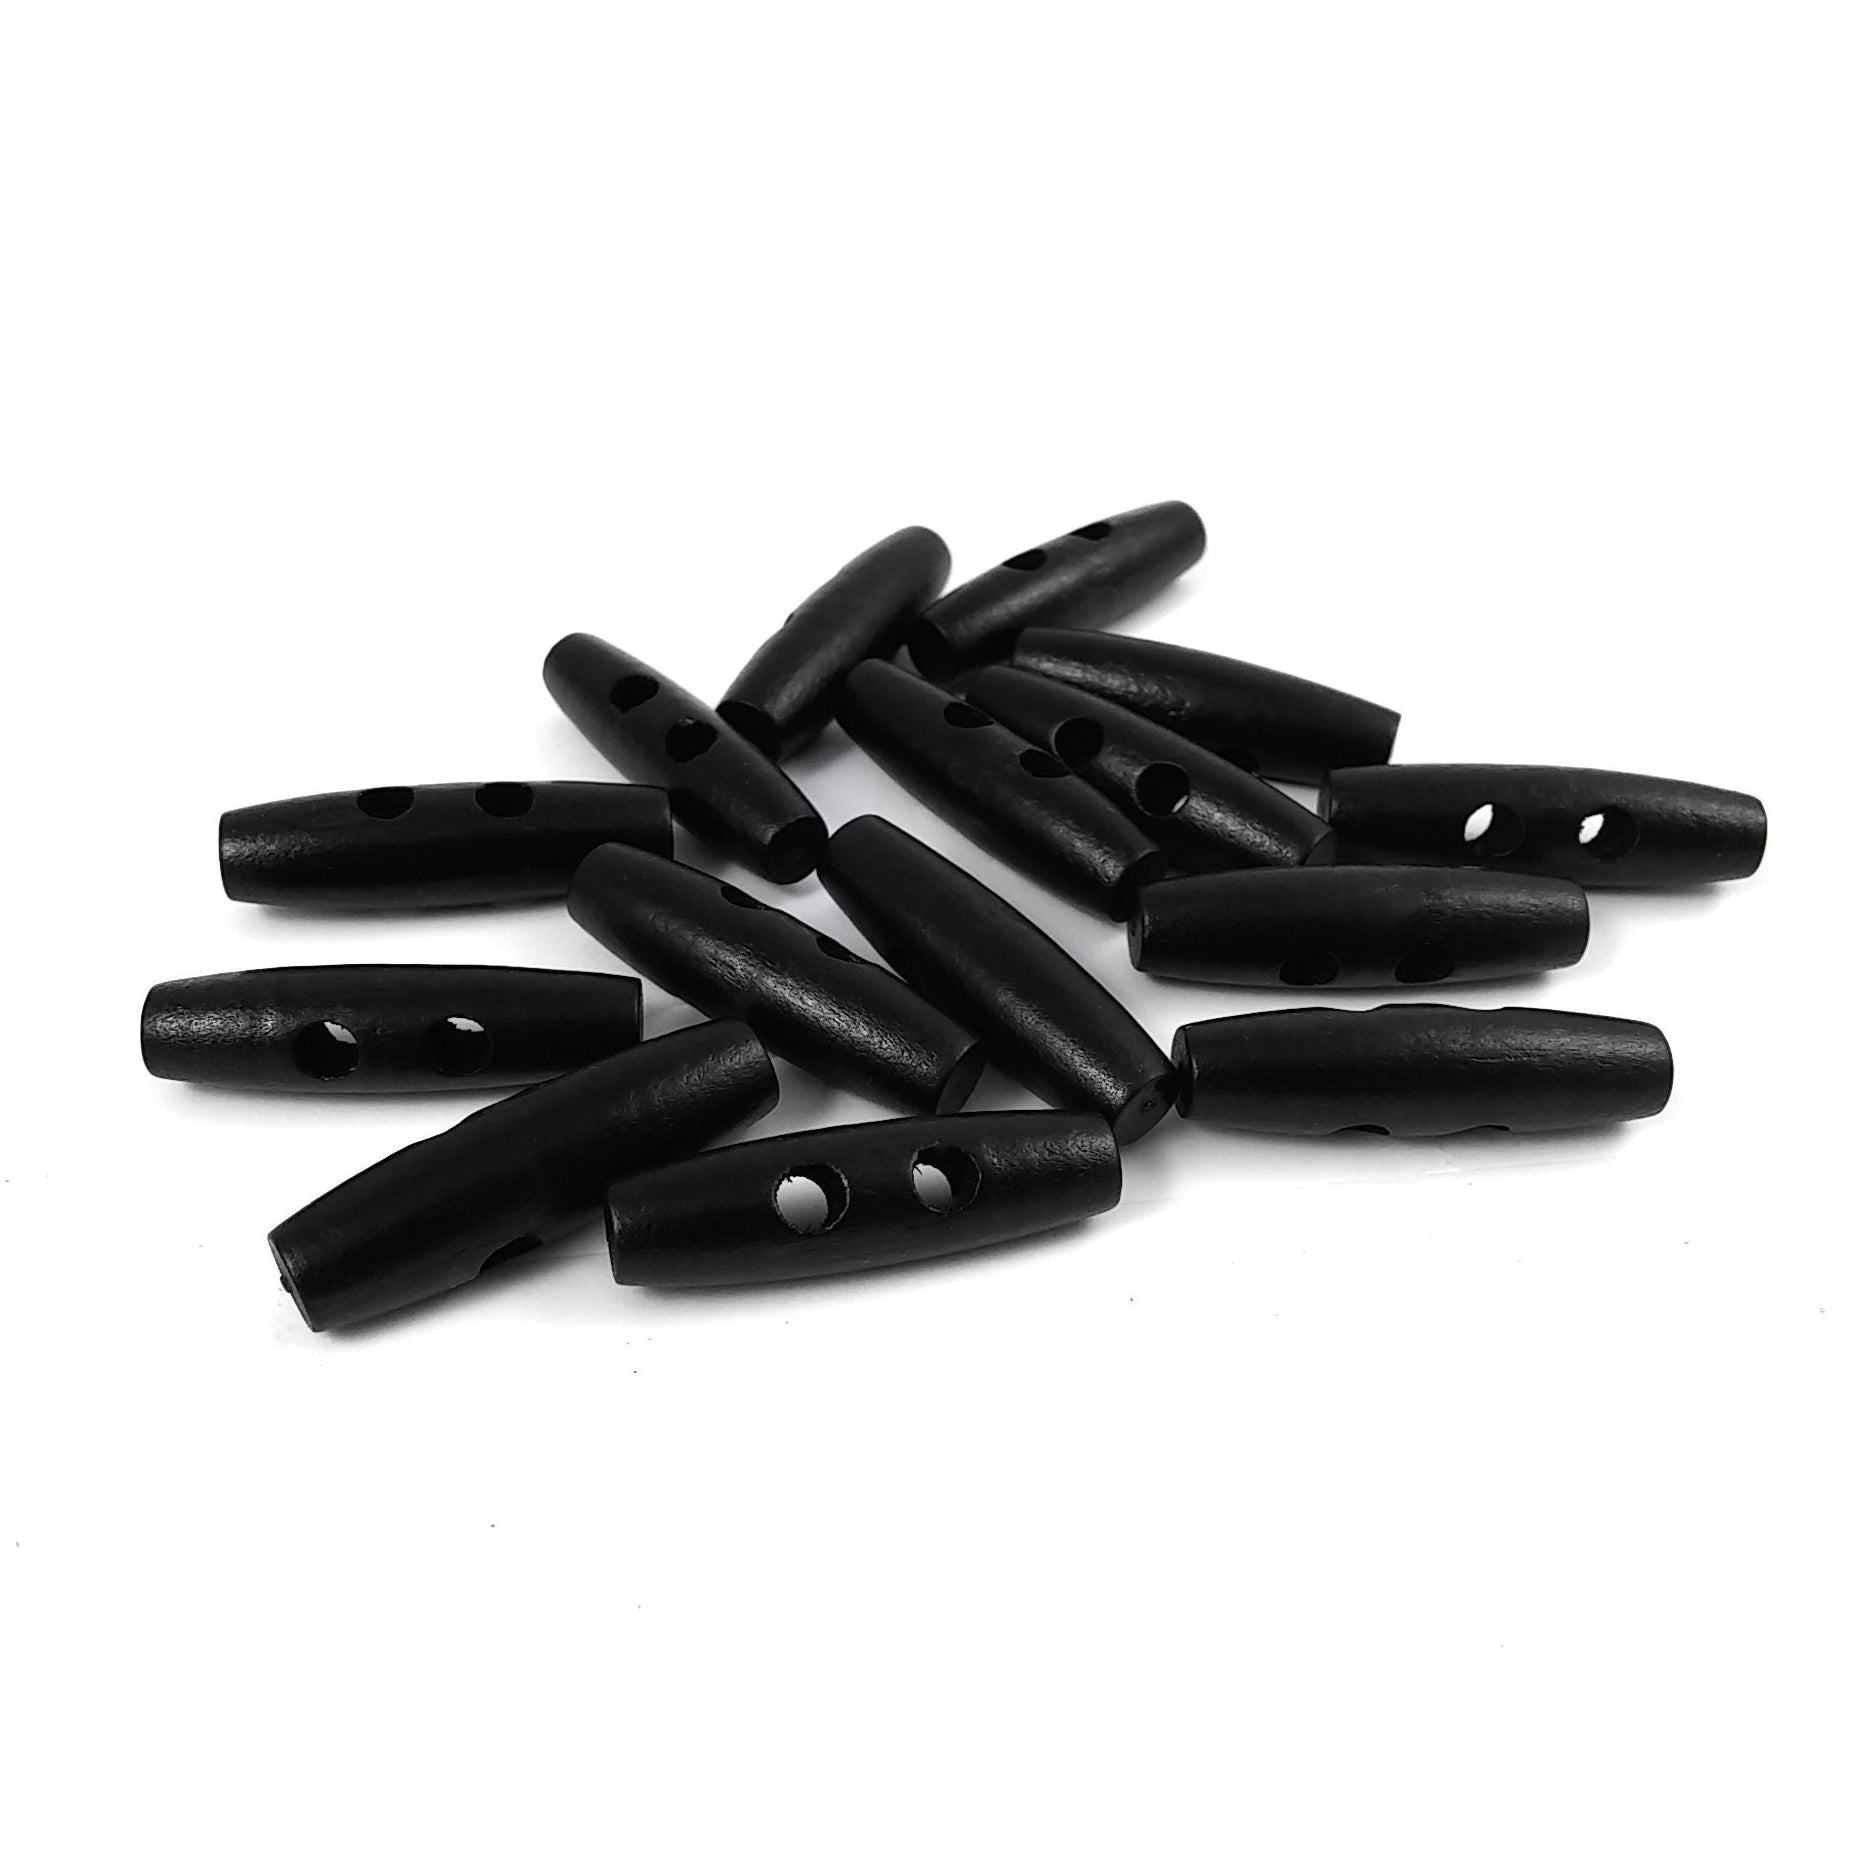 Black wooden toggle sewing buttons